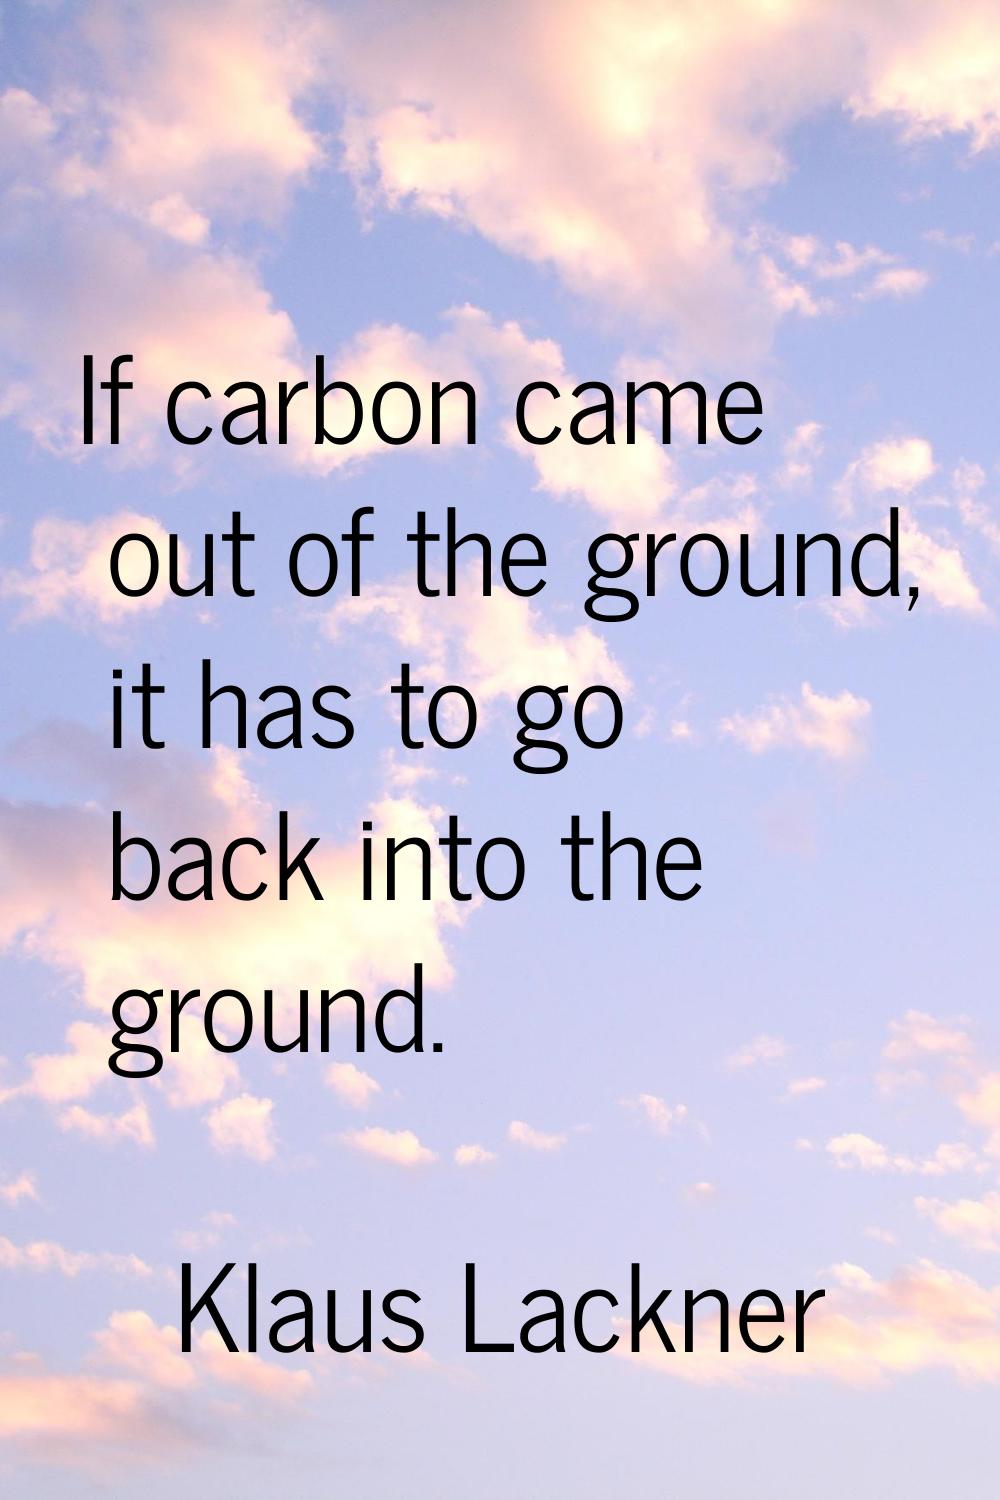 If carbon came out of the ground, it has to go back into the ground.